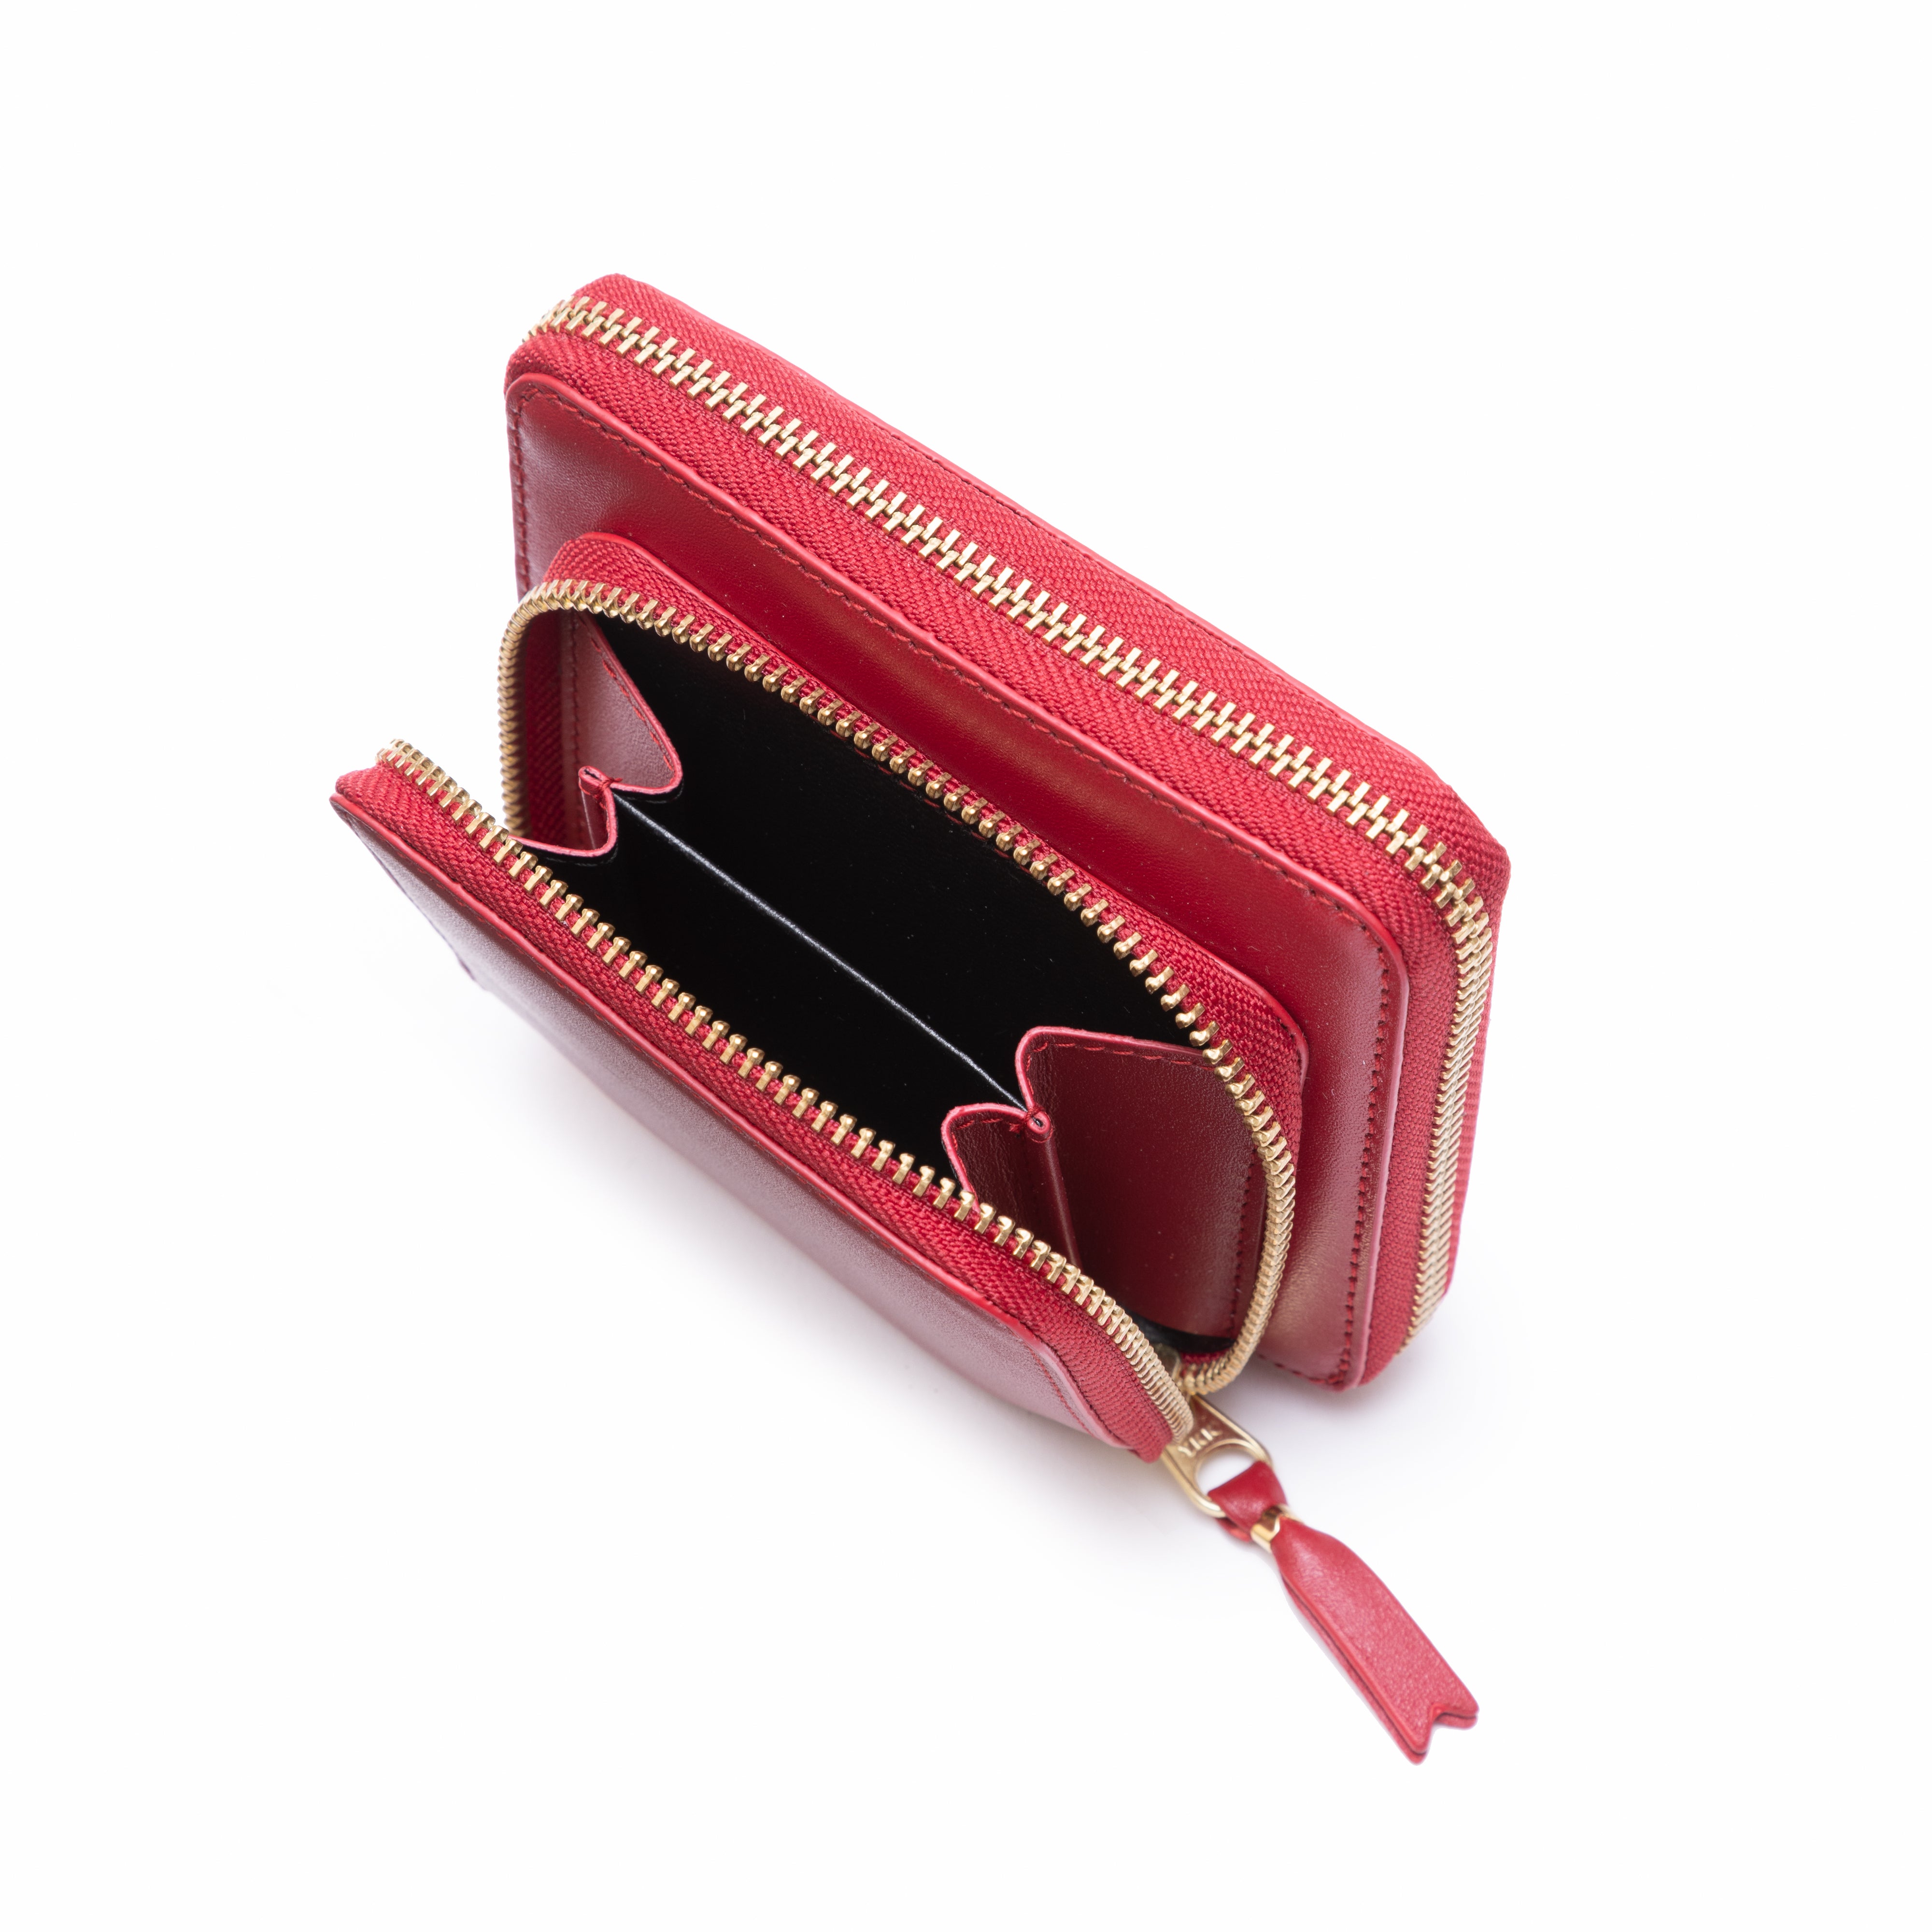 CDG WALLET - Classic Leather Outside Pocket Wallet - (8Z-X021 Red 